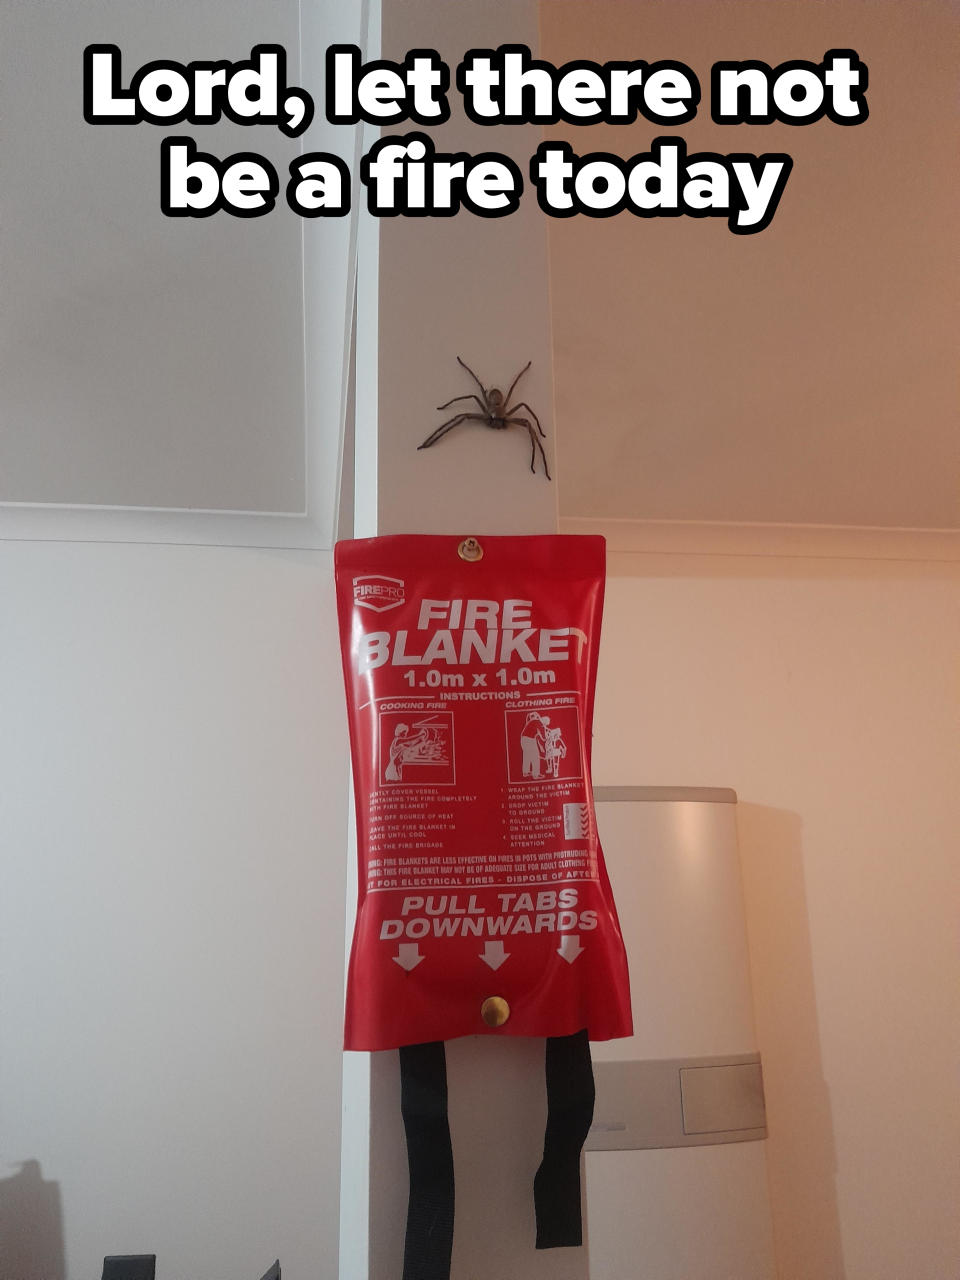 A spider hovering over a fire blanket